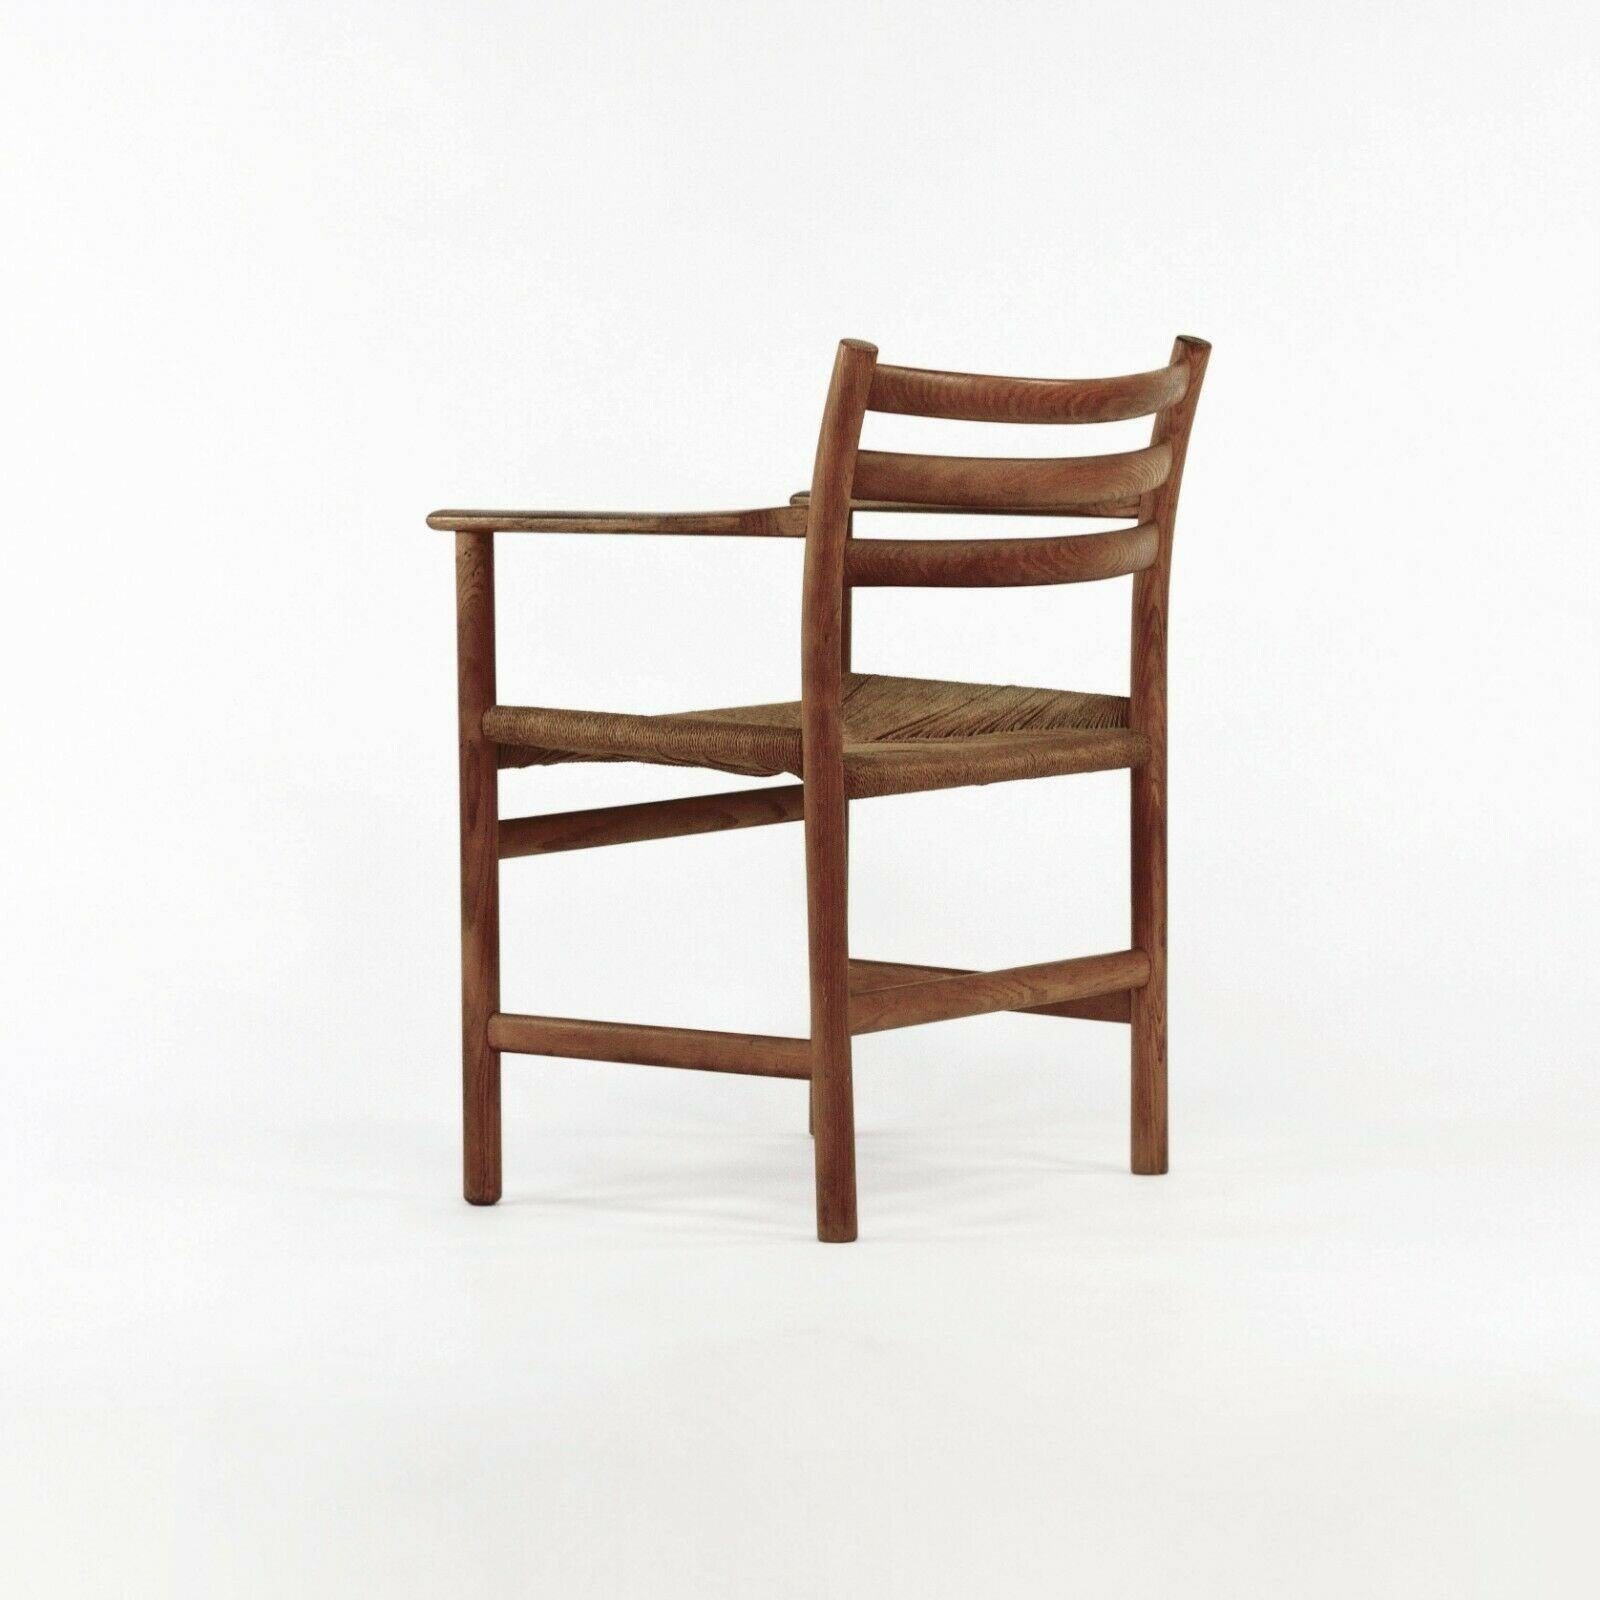 Mid-20th Century 1960s Model 351 Dining Arm Chair by Poul Volther for Soro Stolefabrik of Denmark For Sale